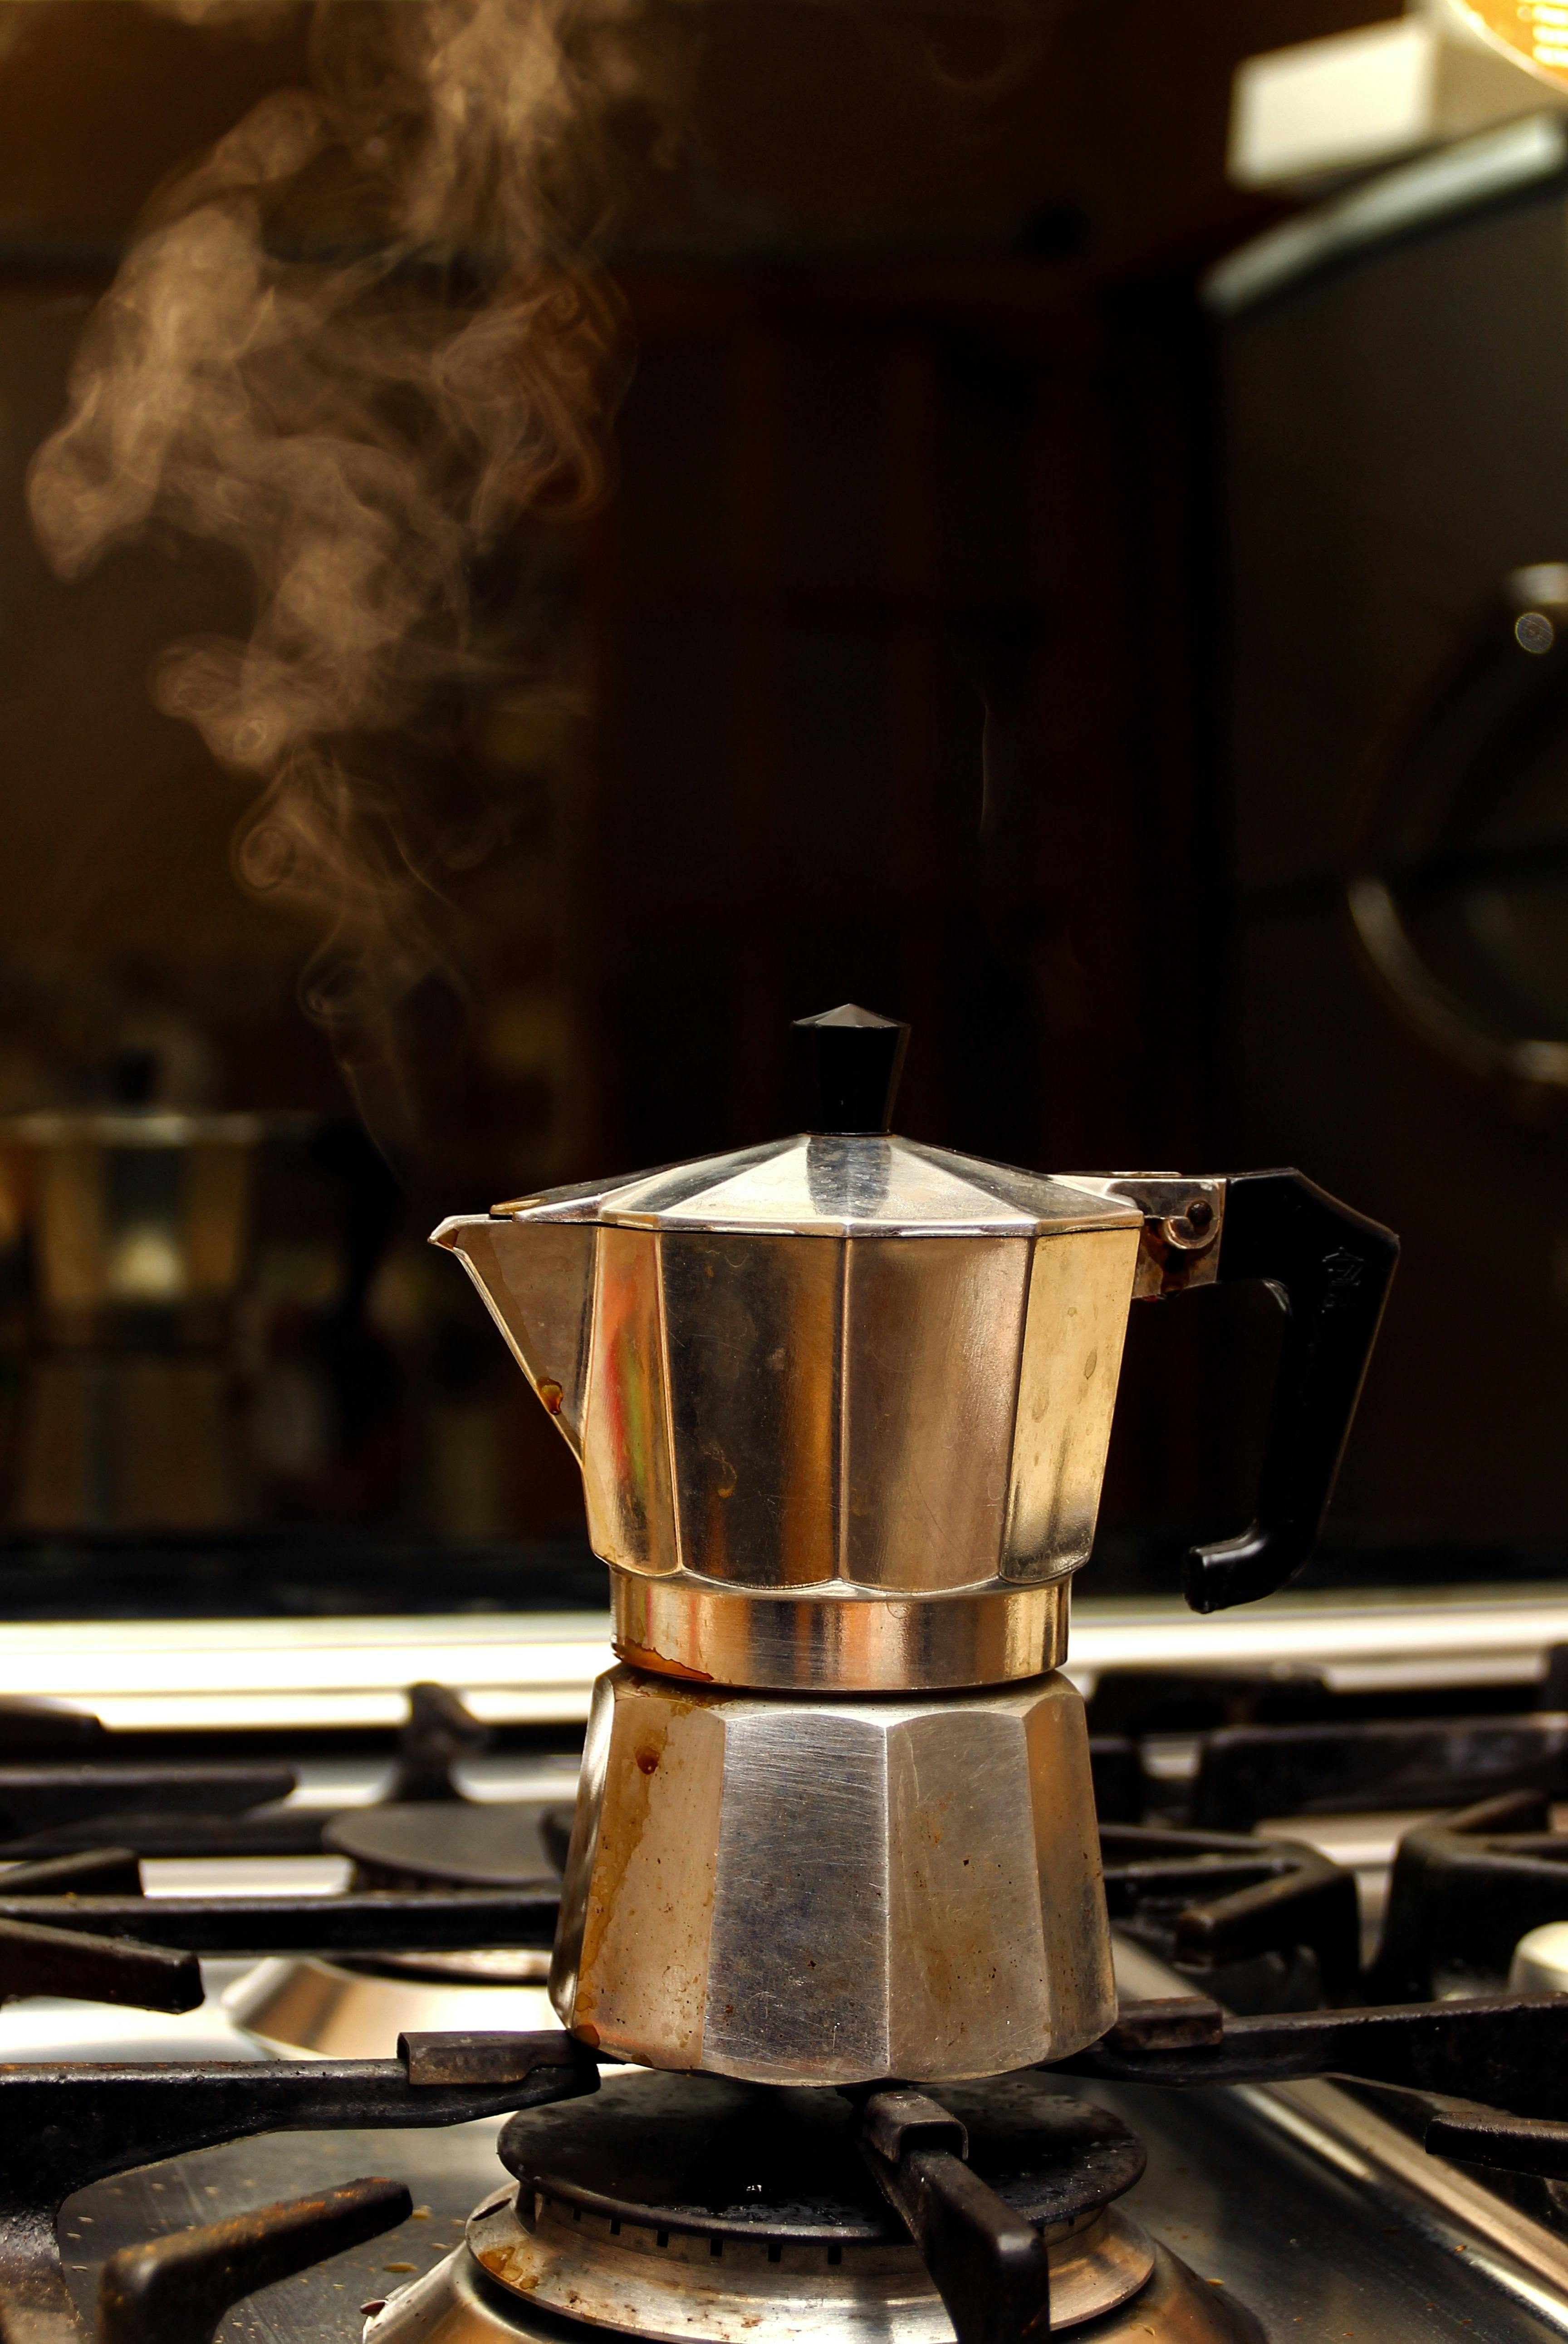 Stainless Steel Coffee Maker on Stove · Free Stock Photo